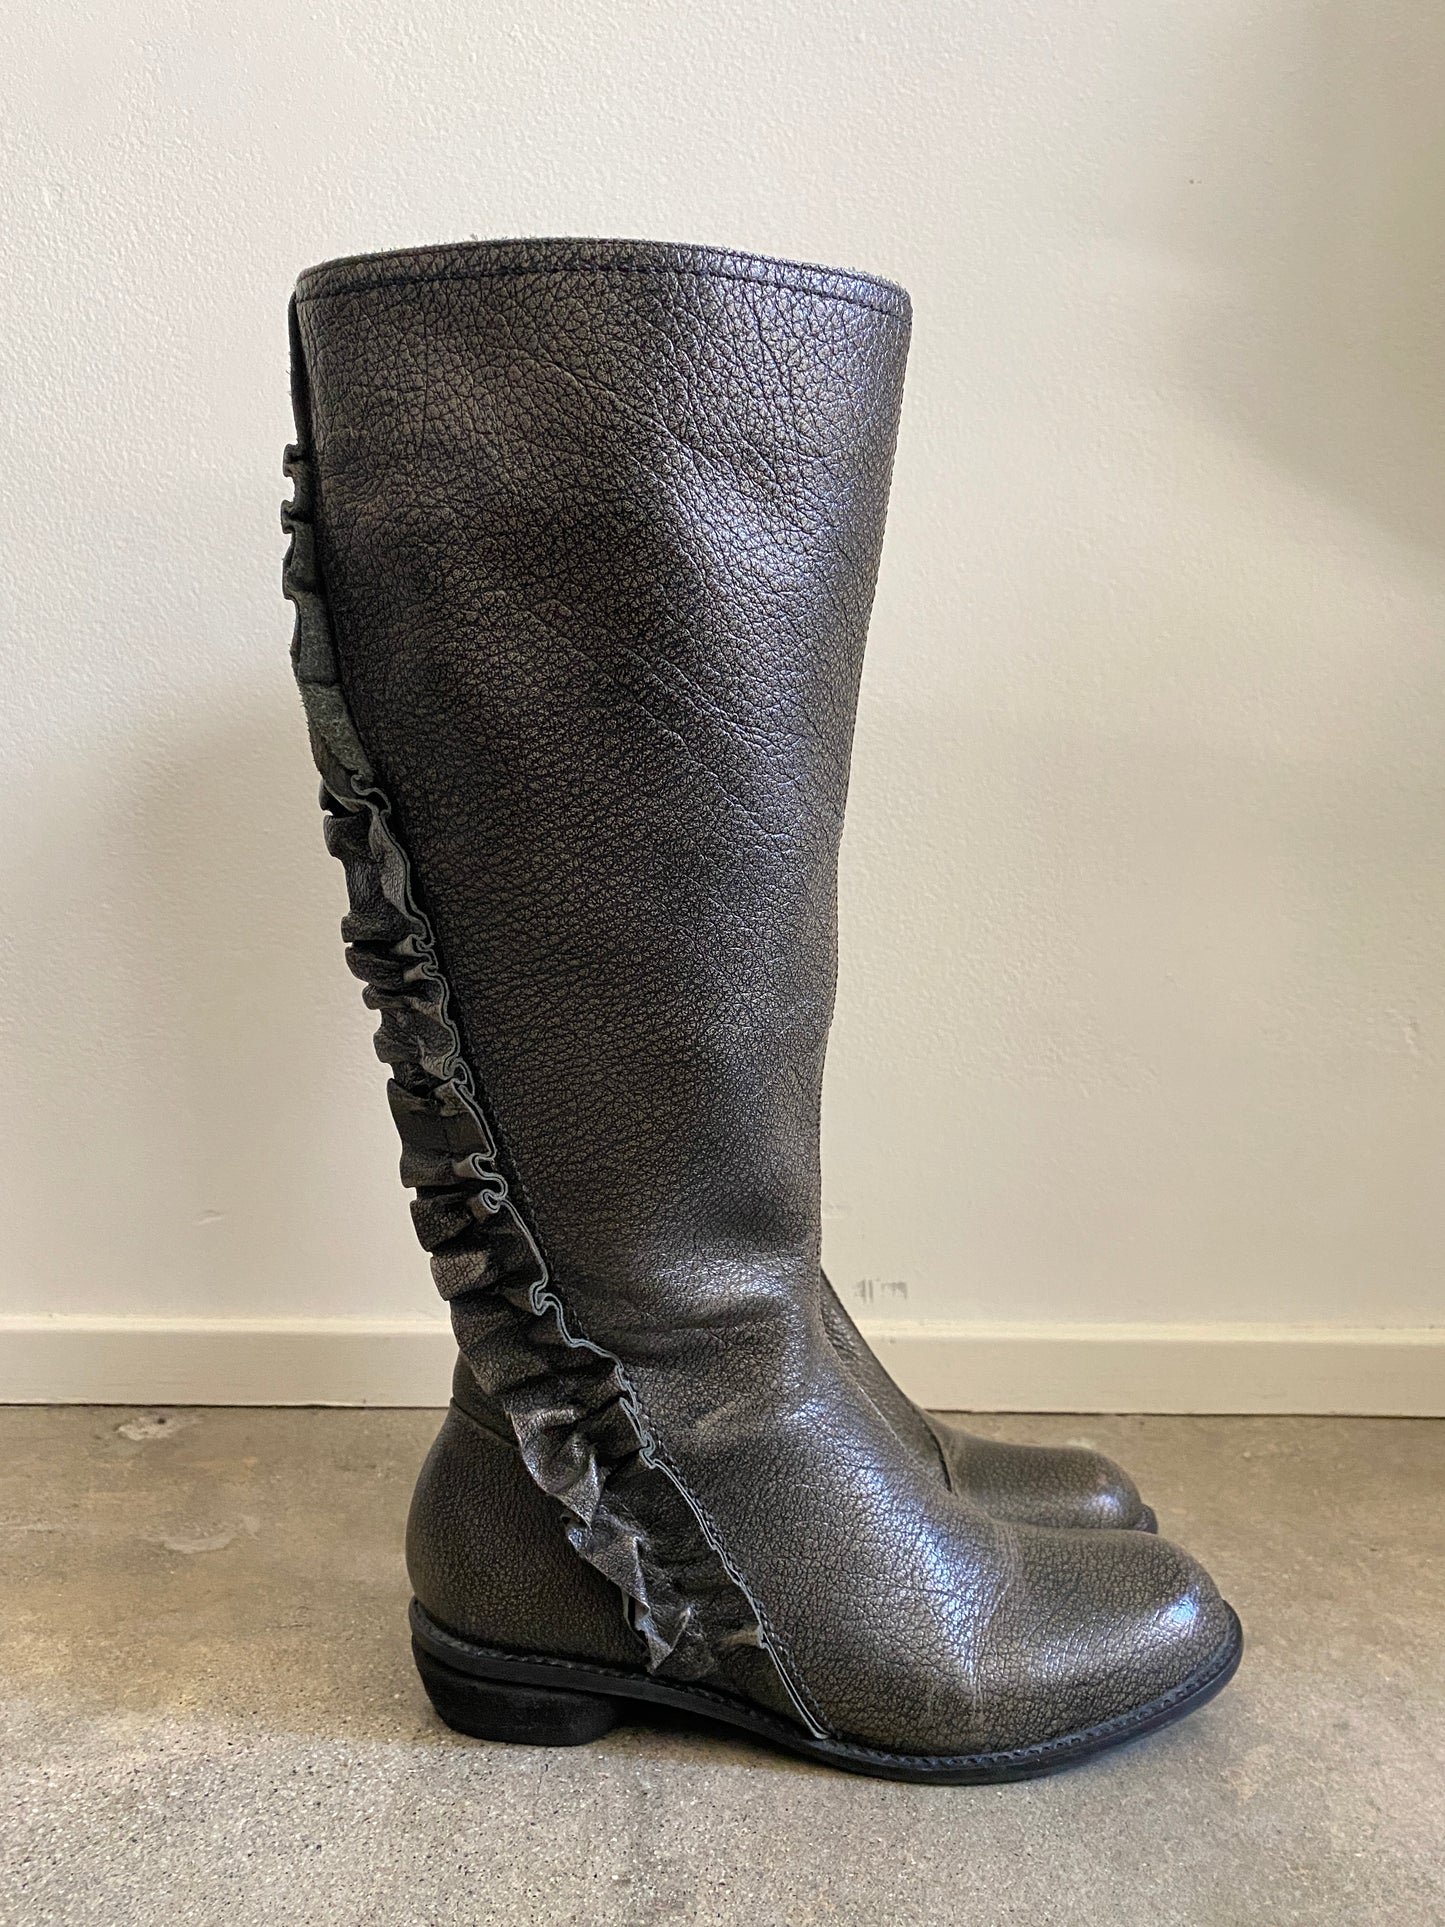 00's Ruffle Riding Boots